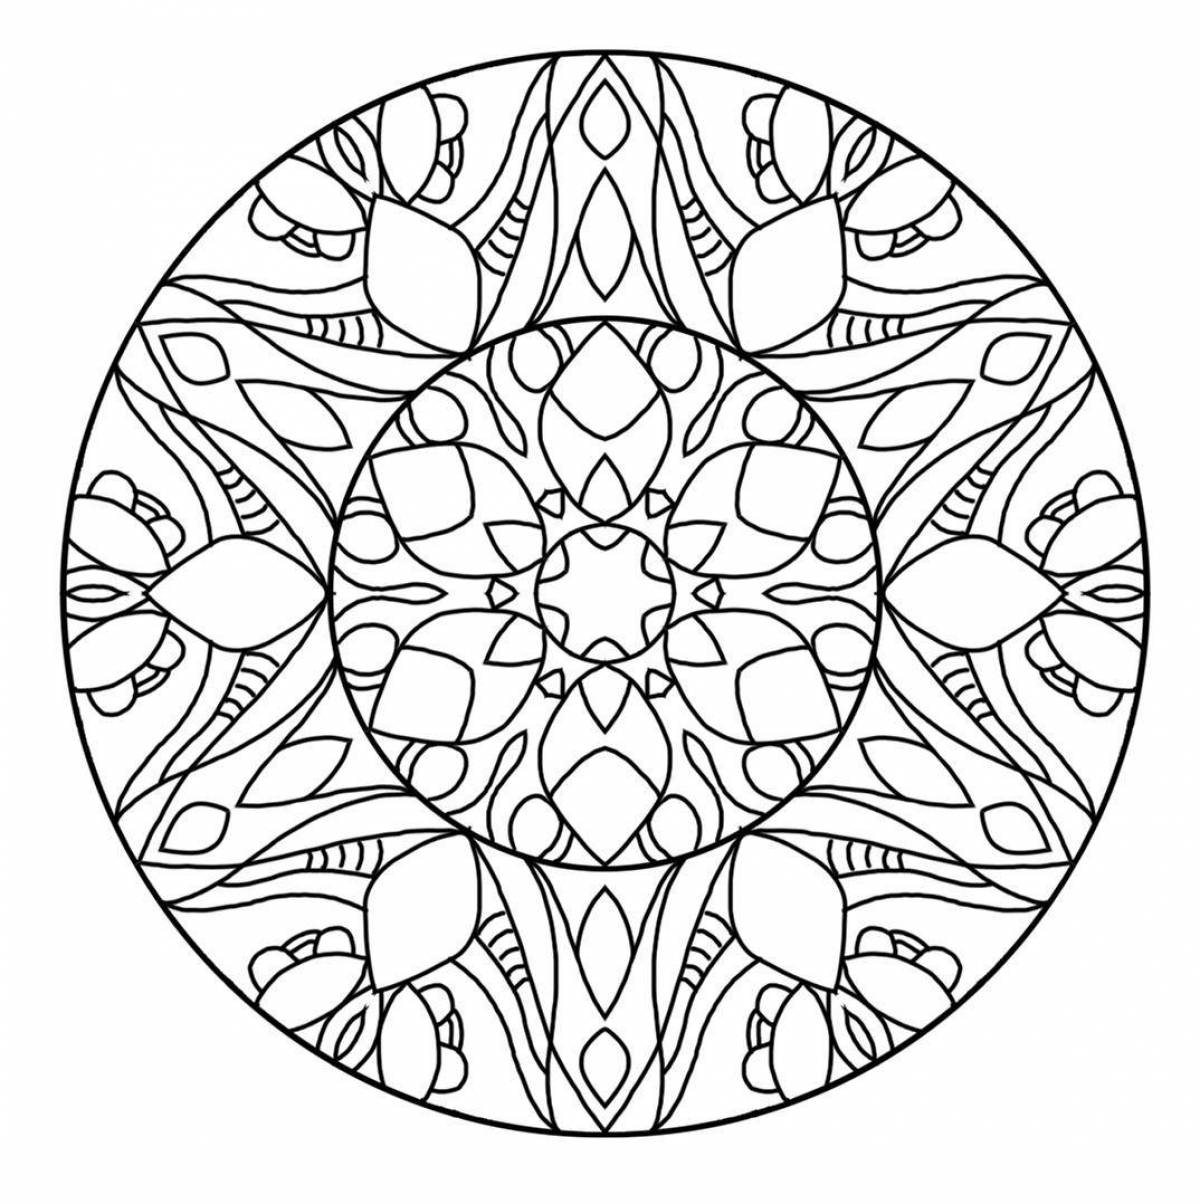 Playful mandala coloring book for 10 year olds